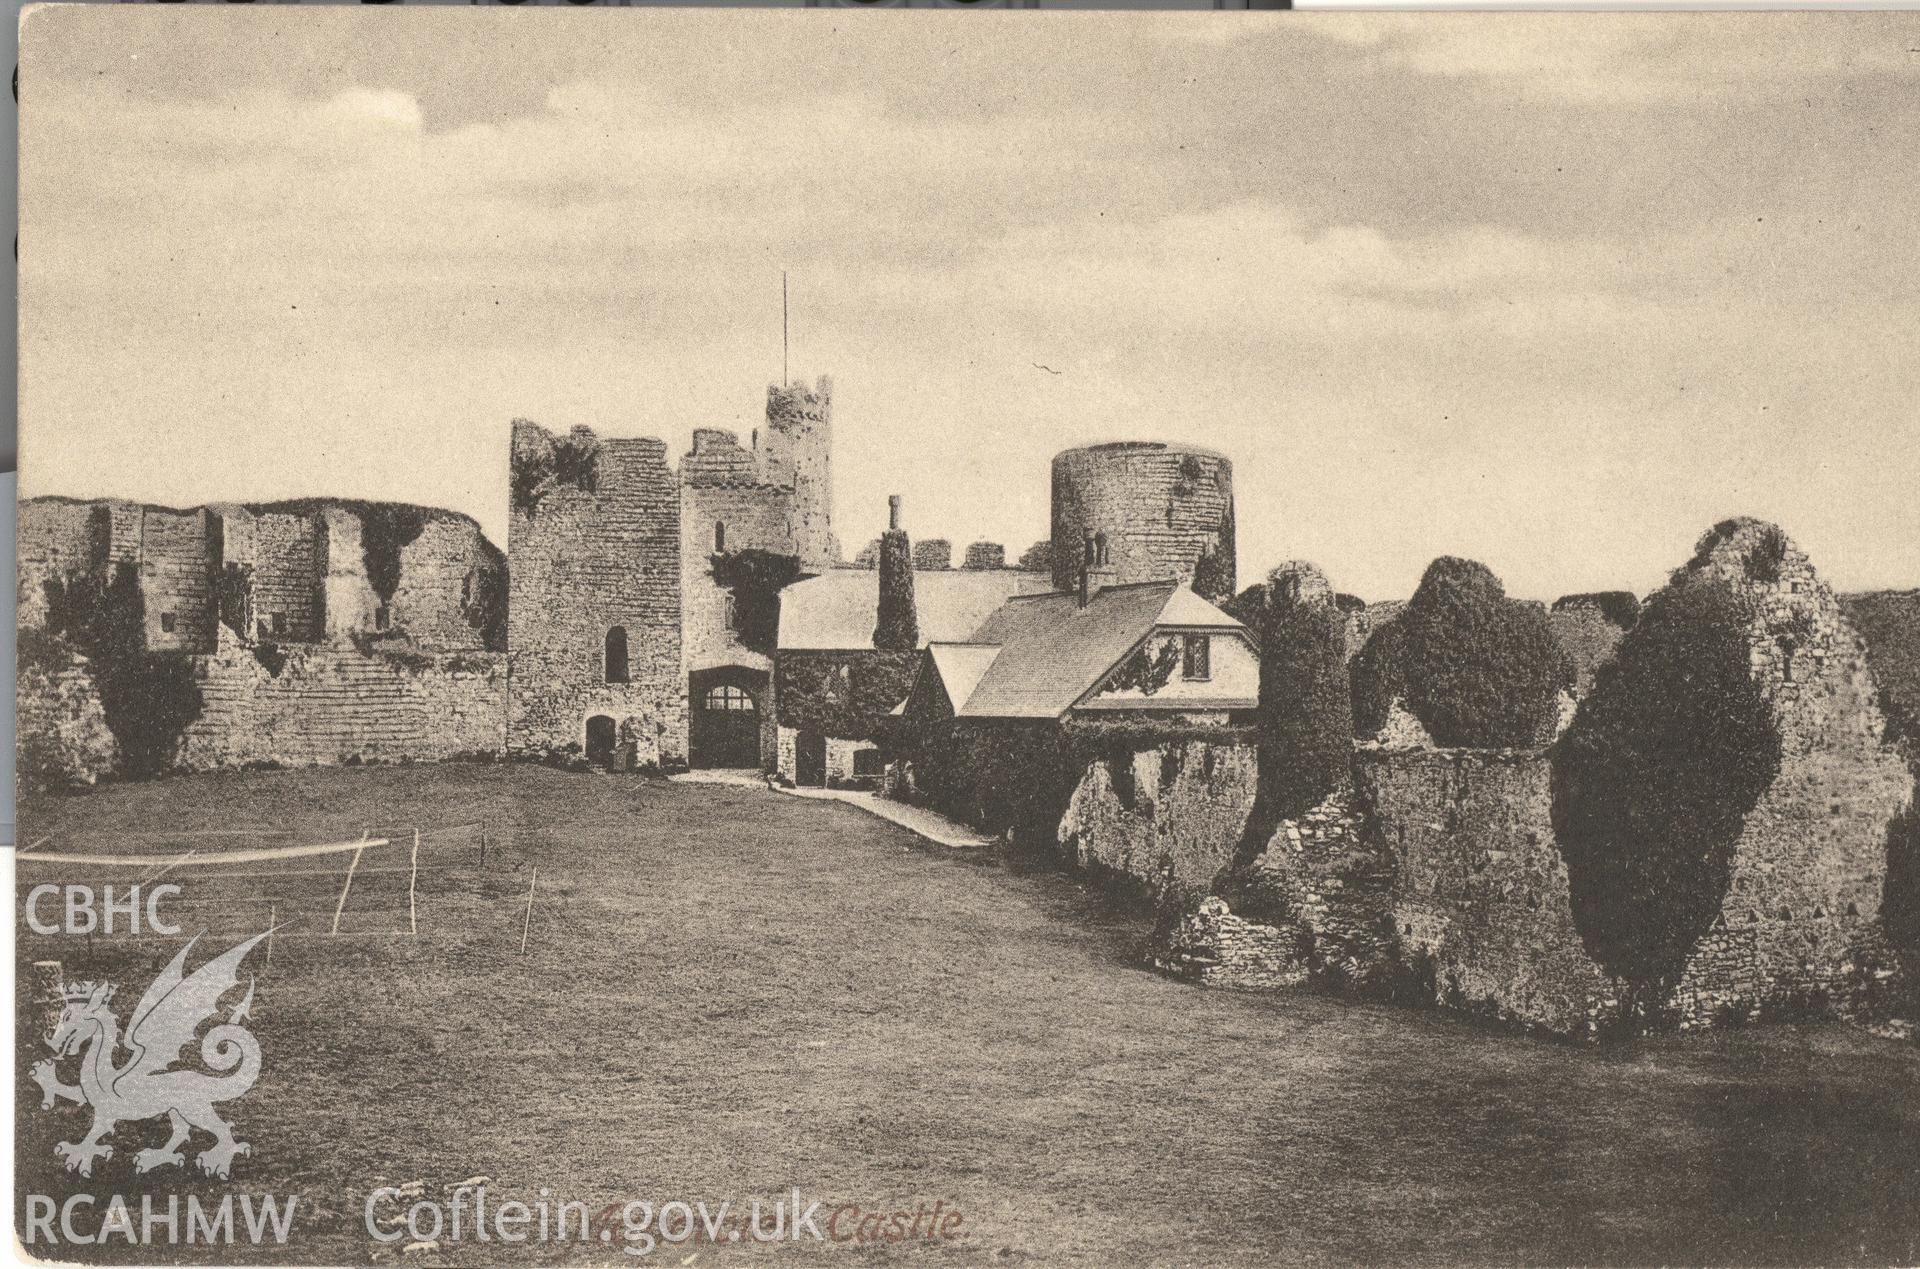 Digitised postcard image of Manorbier Castle, F.Frith and Co.Ltd., Reigate. Produced by Parks and Gardens Data Services, from an original item in the Peter Davis Collection at Parks and Gardens UK. We hold only web-resolution images of this collection, suitable for viewing on screen and for research purposes only. We do not hold the original images, or publication quality scans.